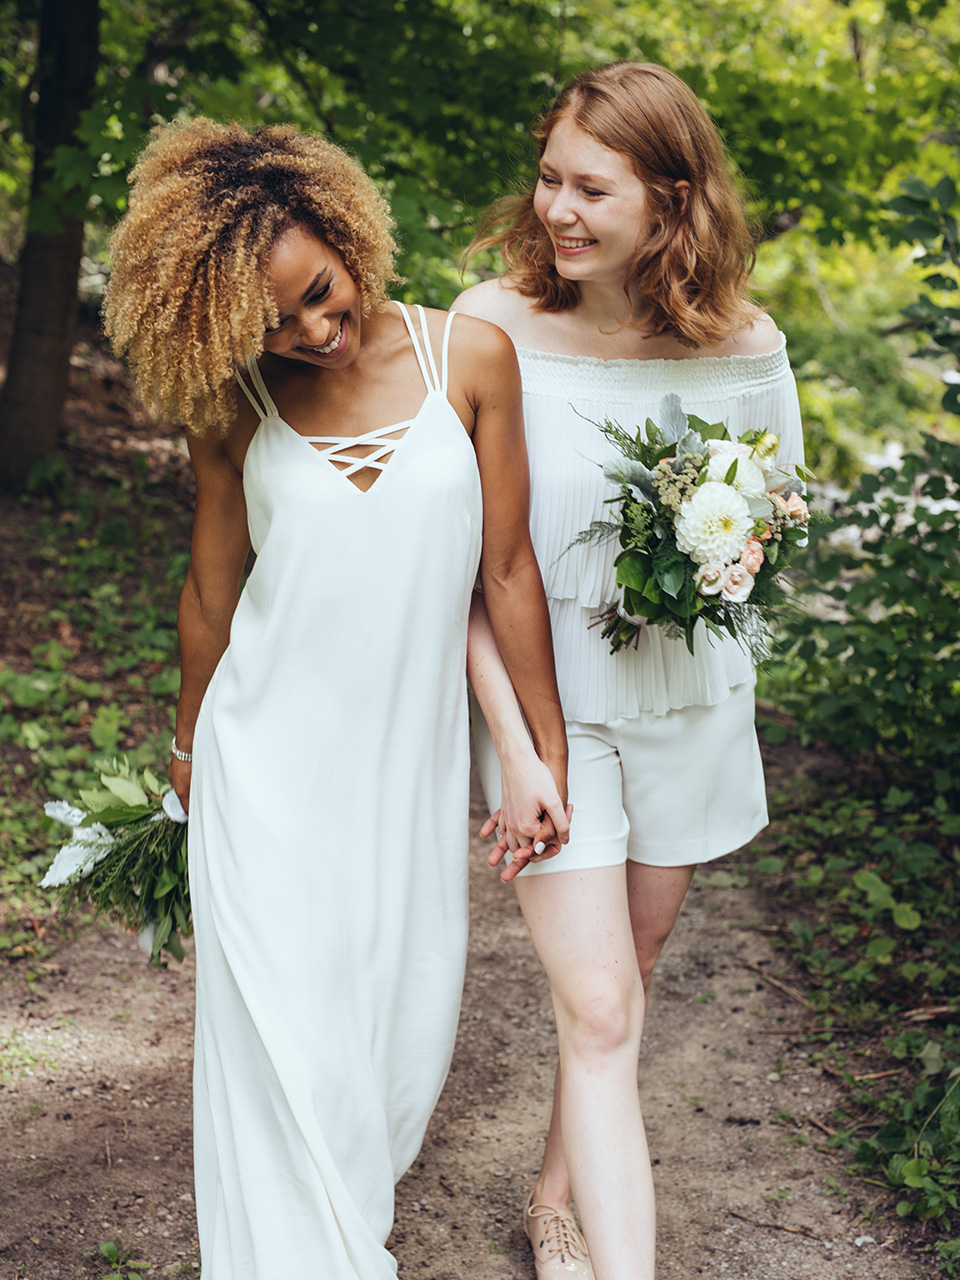 5 Things to Know Before Attending a Same-Sex Wedding